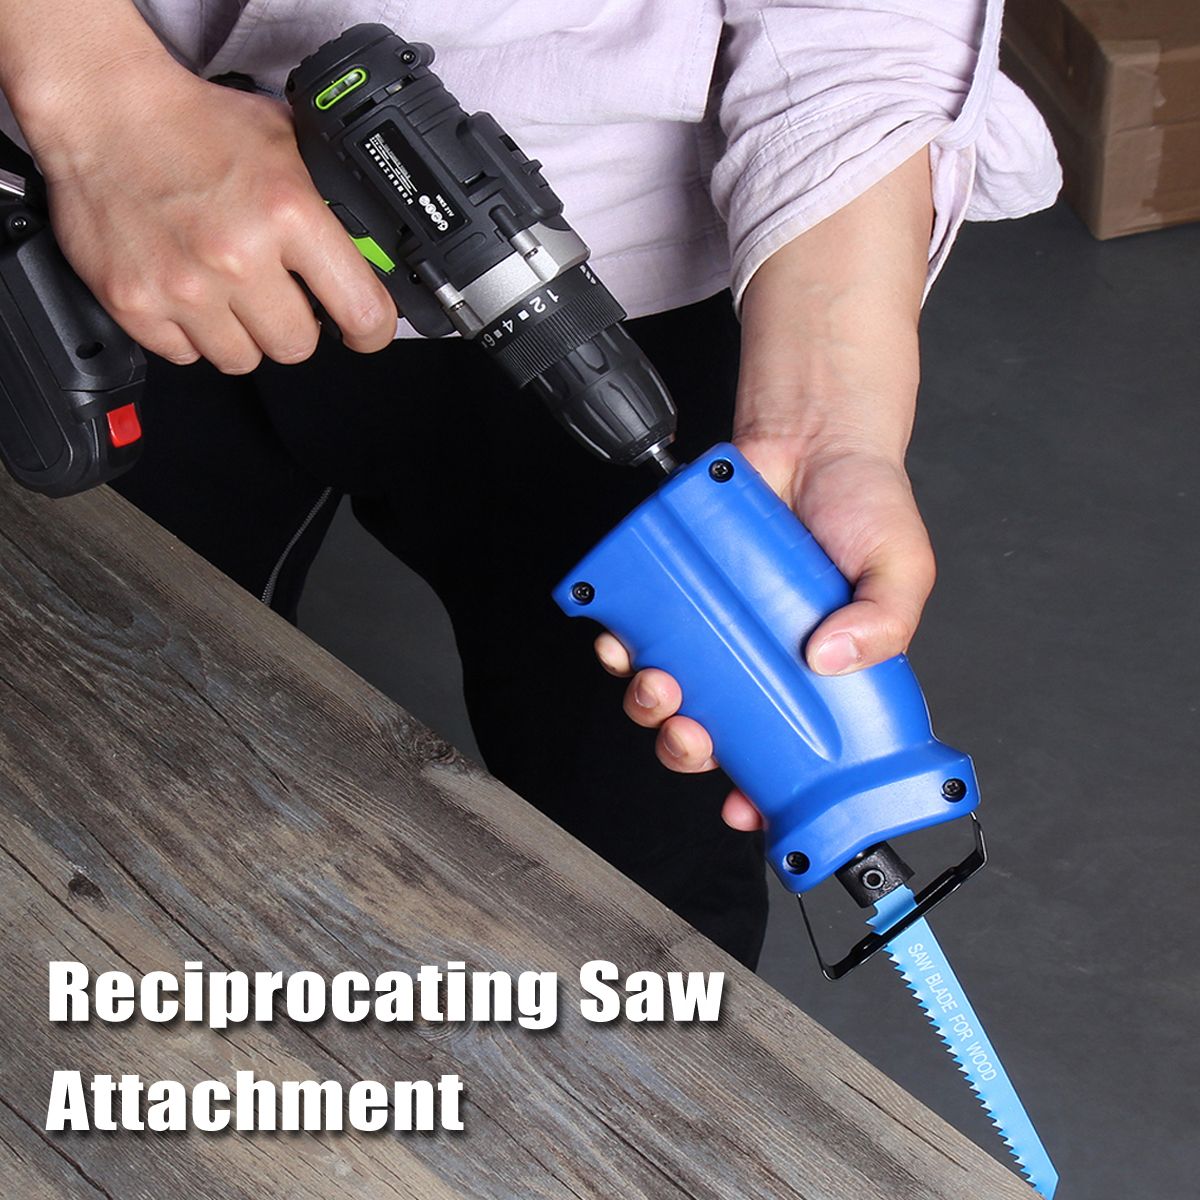 Reciprocating-Saw-Convert-Adapter-Woodworking-Chainsaw-For-Cordless-Power-Drill-1375038